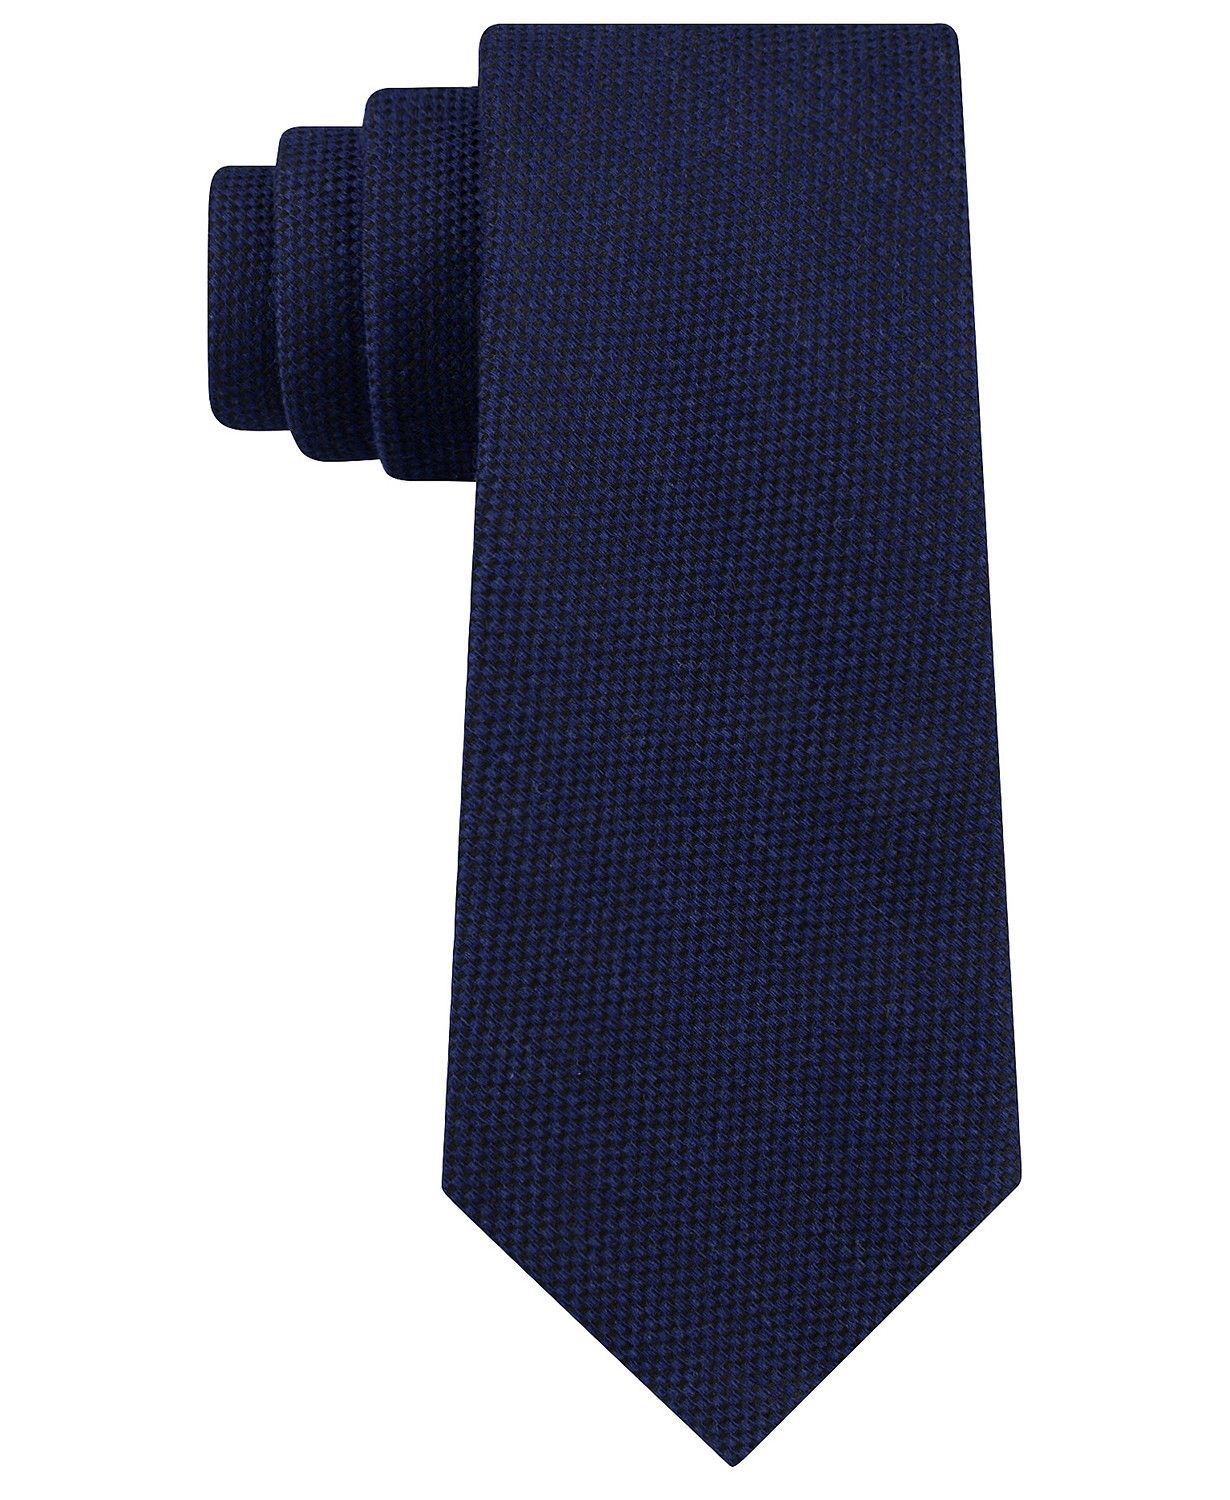 <br>Color: Blues<br>Pattern: Solid<br>Style: Neck Tie<br>Width: Skinny (Material: Silk